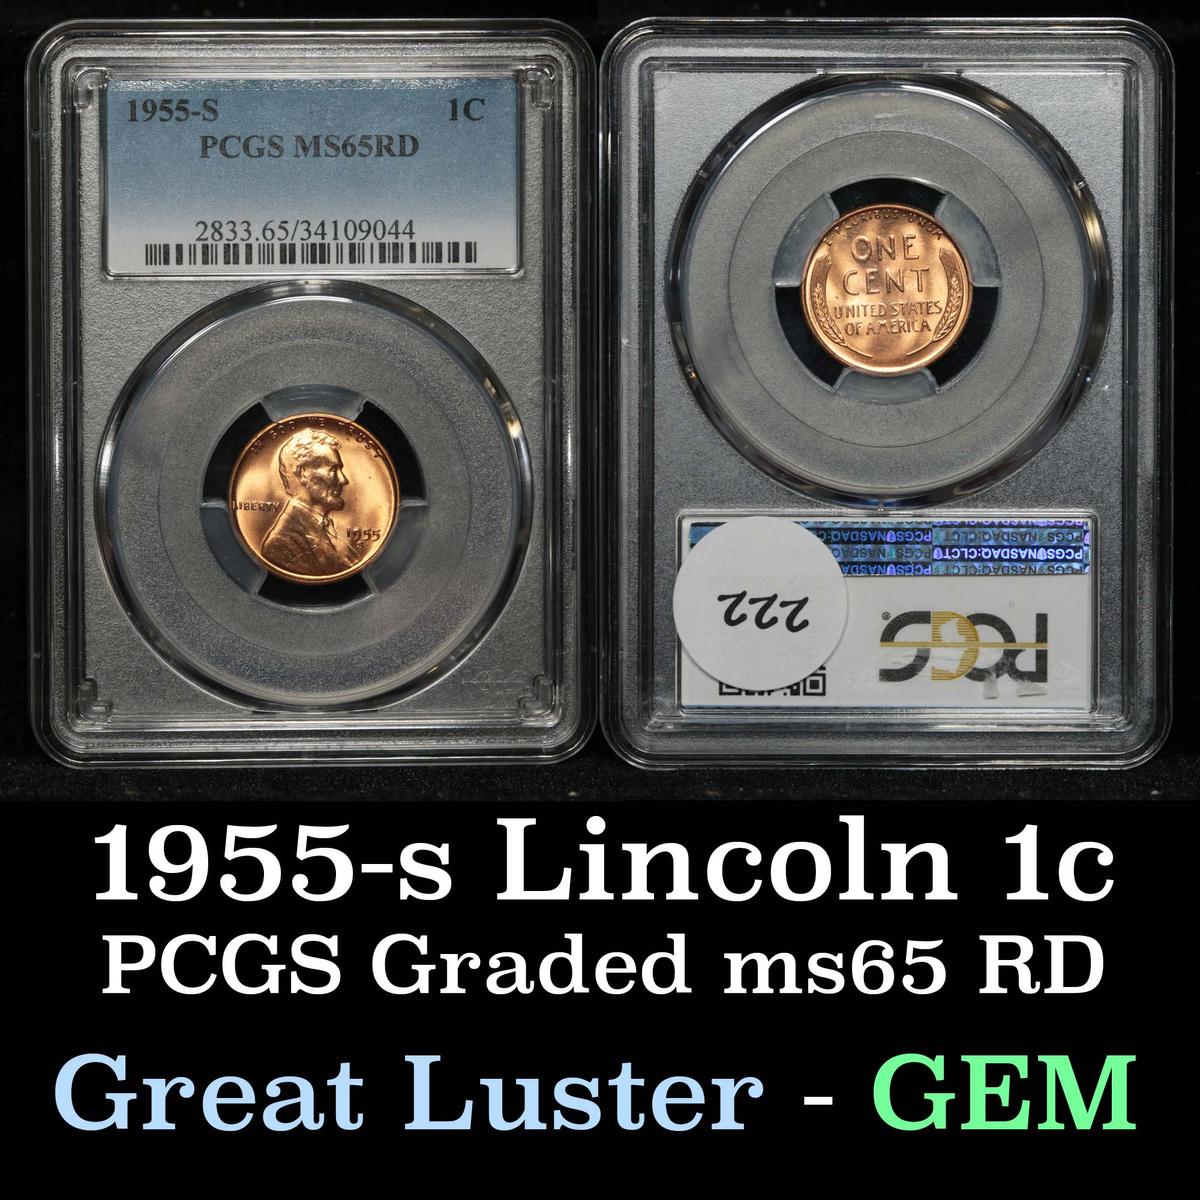 PCGS 1955-s Lincoln Cent 1c Graded ms65 RD By PCGS